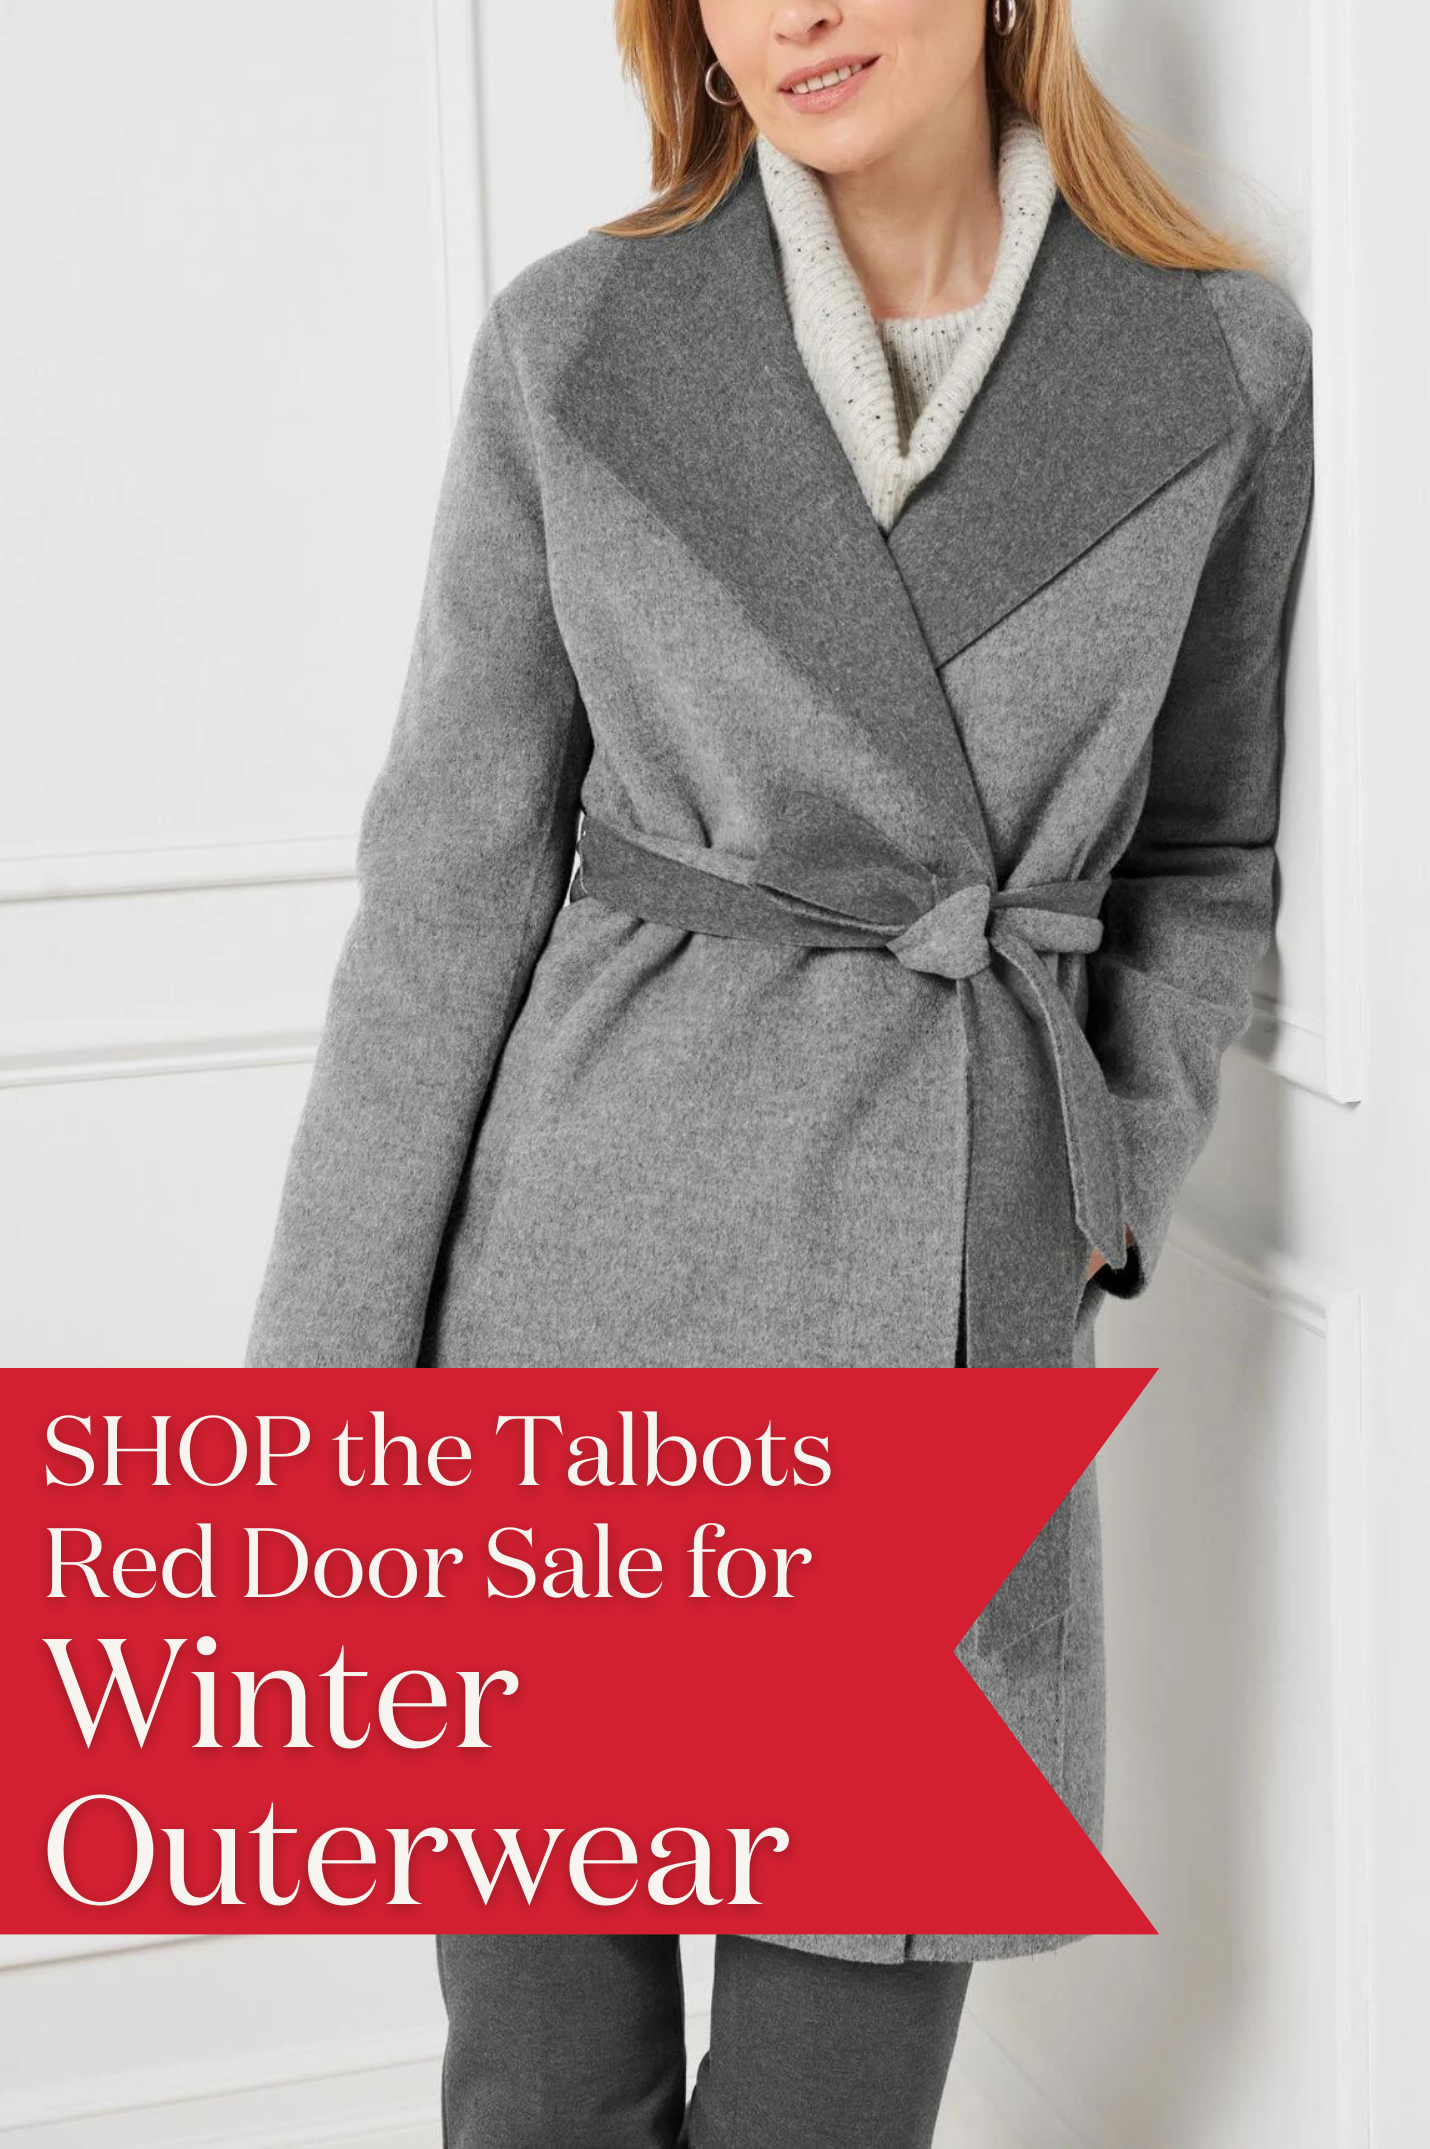 Shop the Talbots Red Door Sale for Winter Outerwear